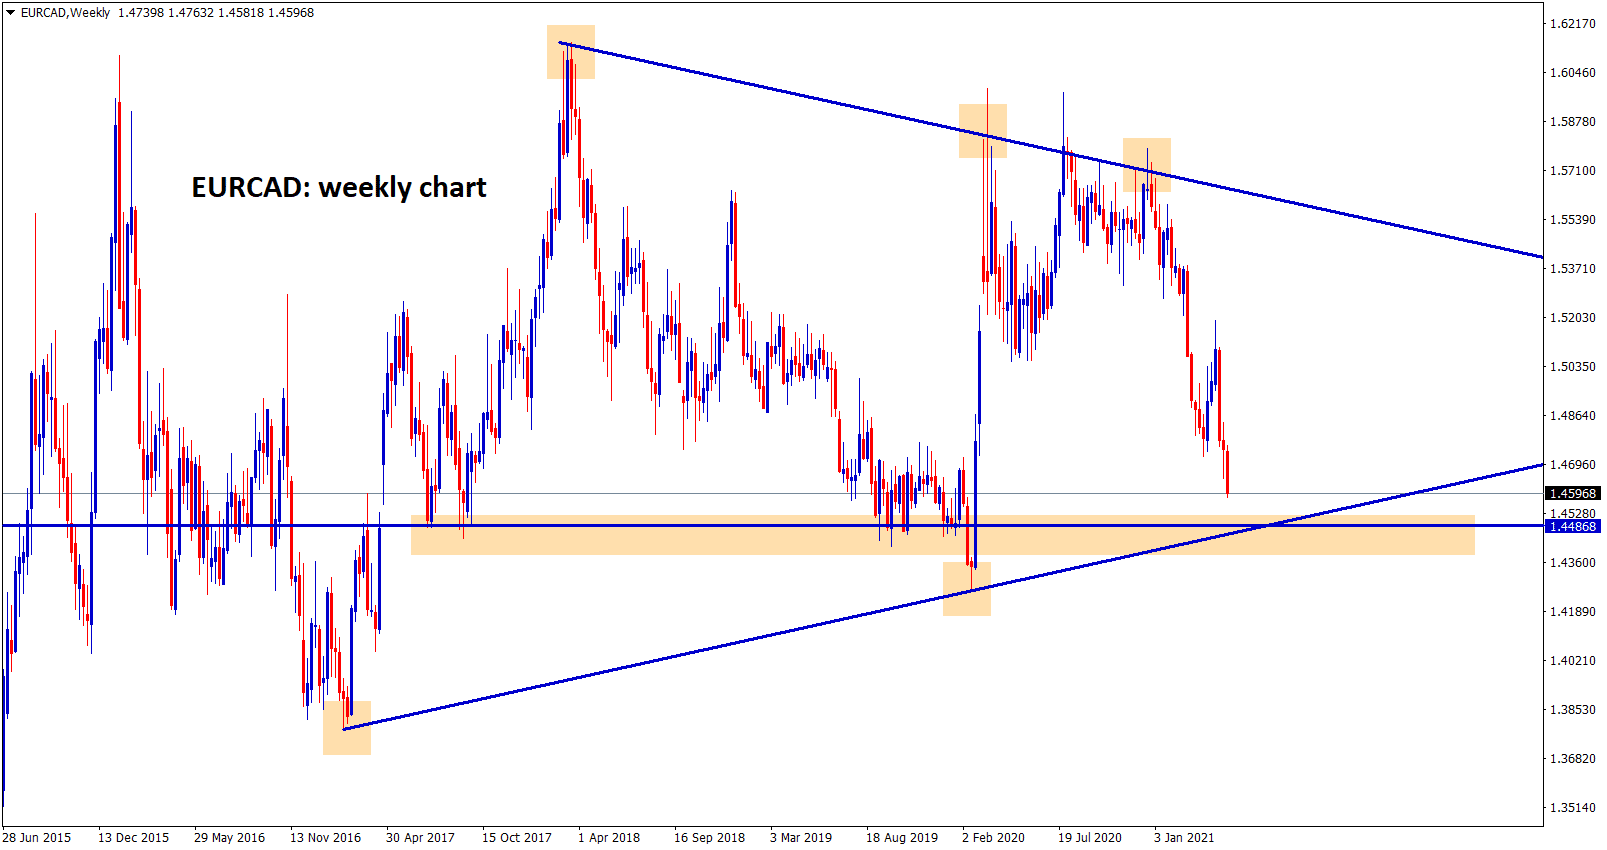 EURCAD going to reach the support zone in weekly chart.